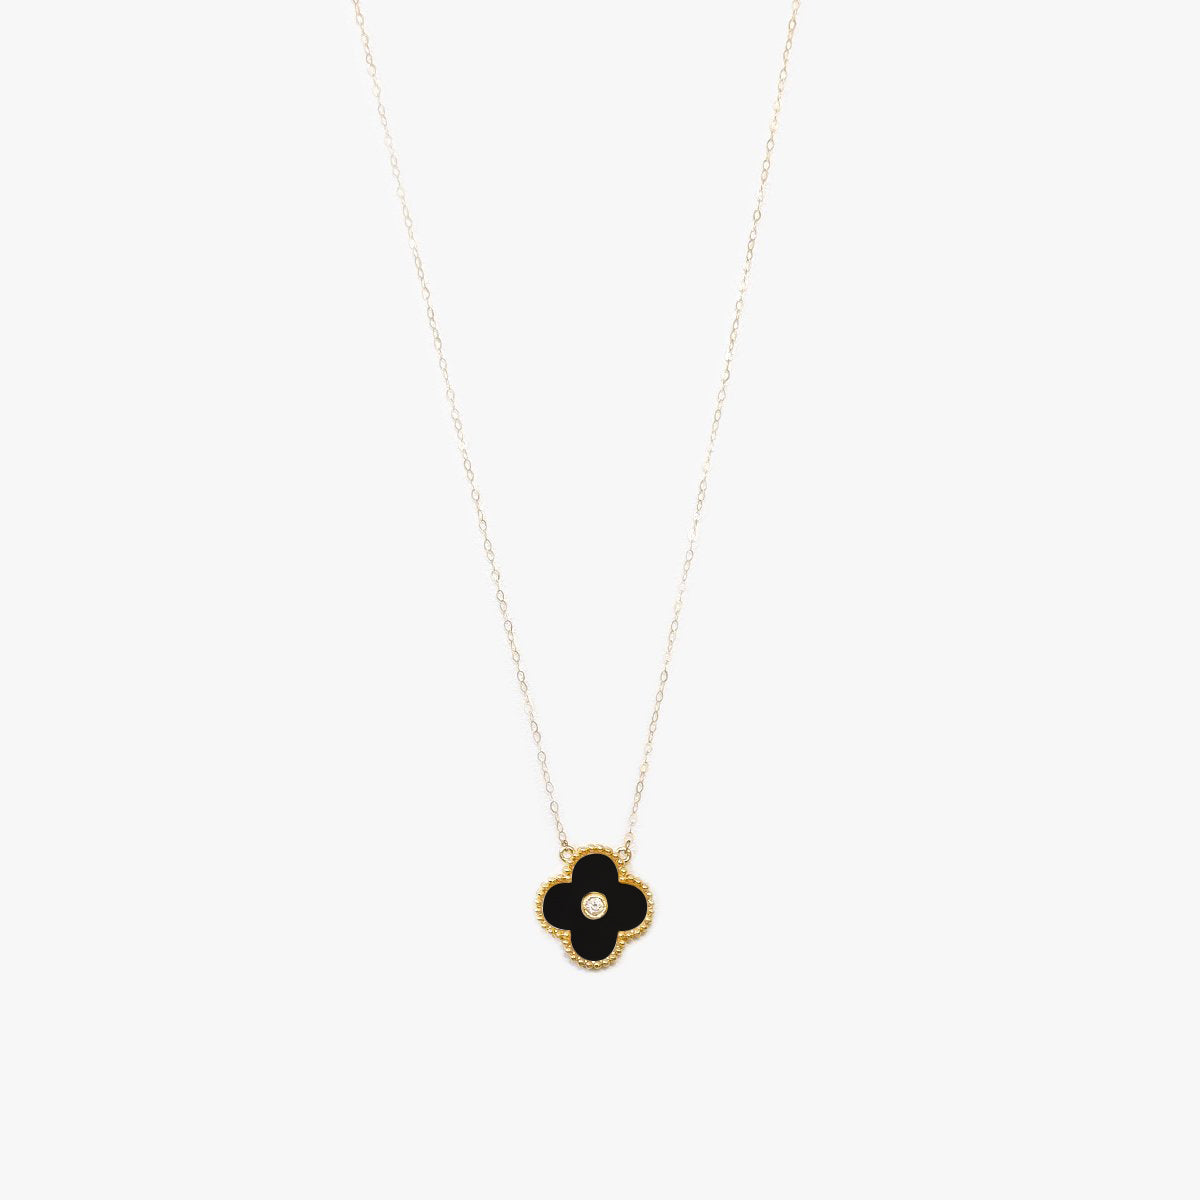 The Designer Black Clover and Diamond Necklace in Solid Gold